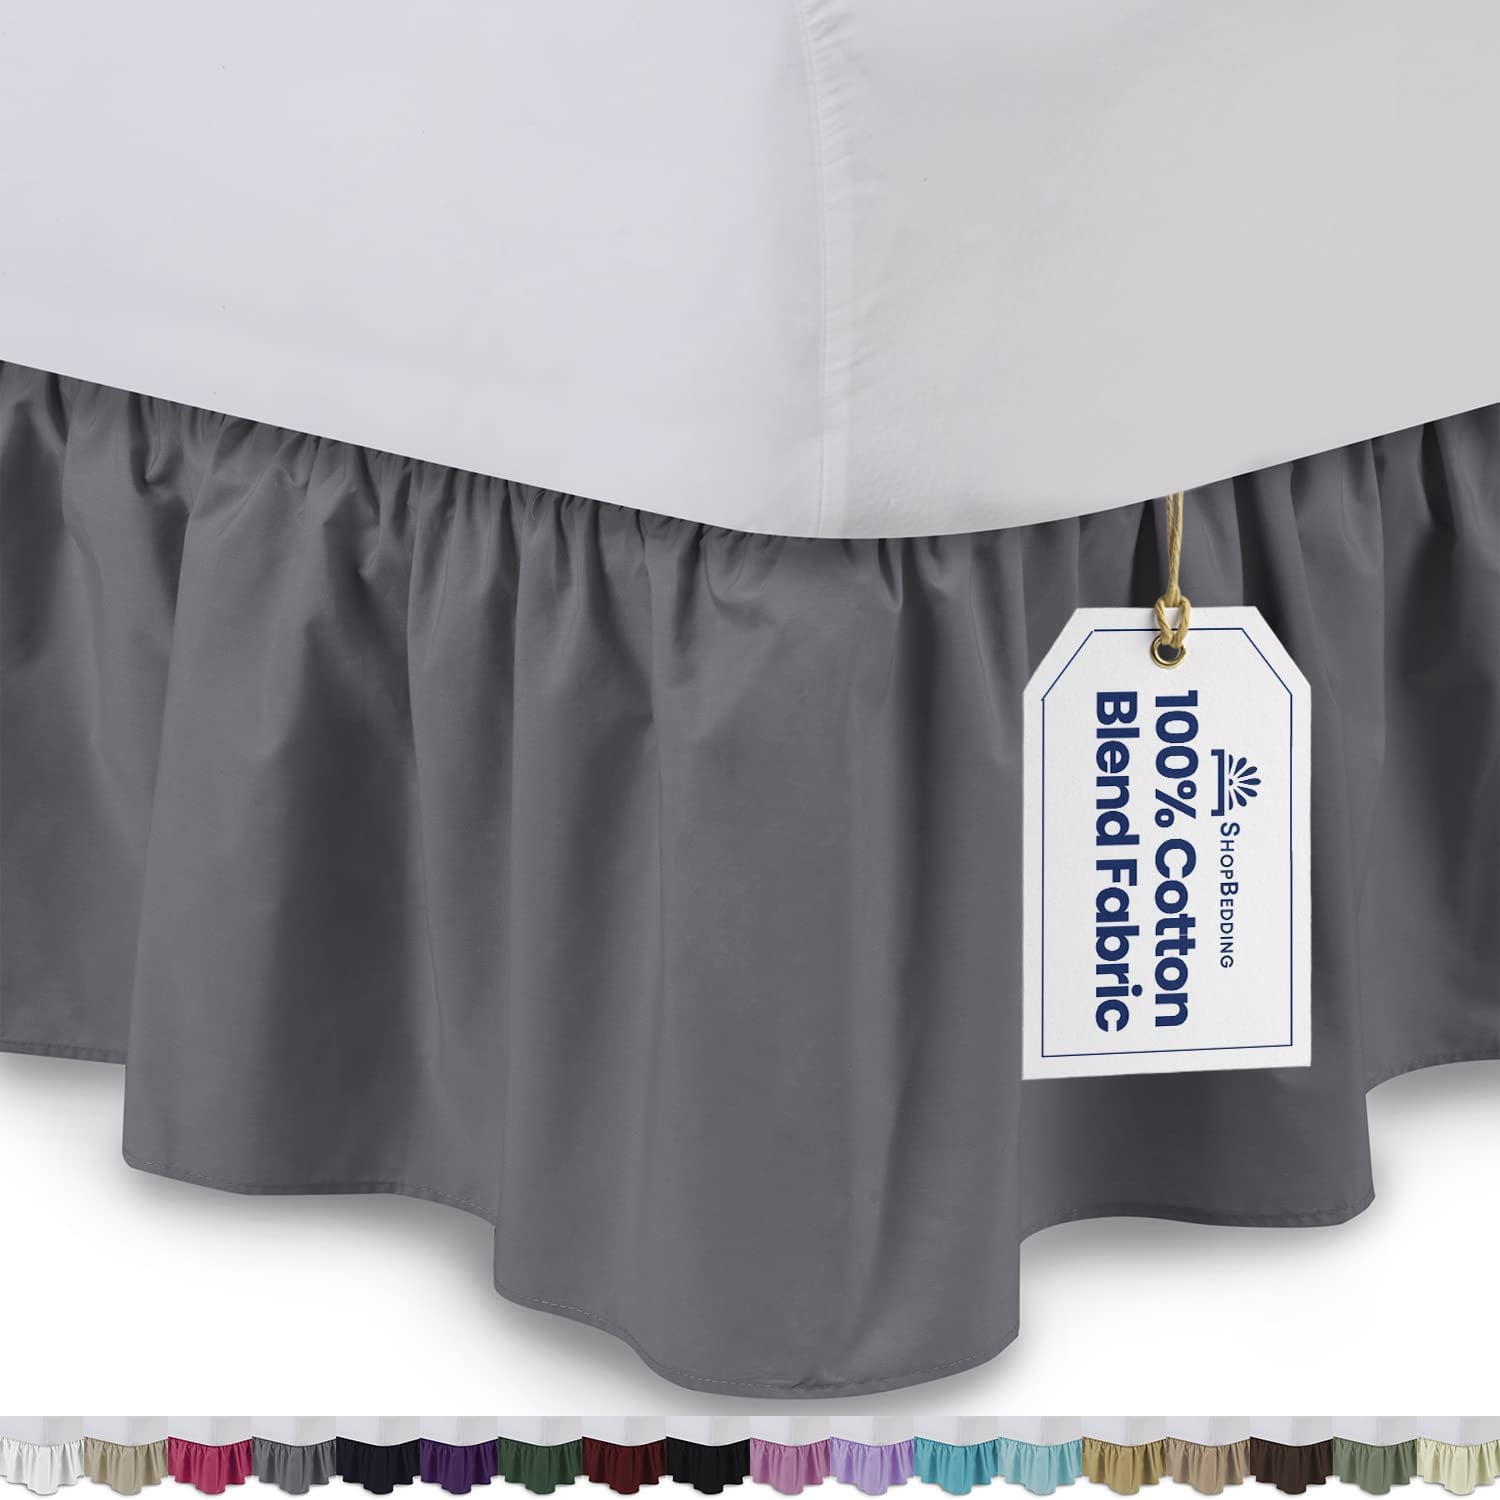 Extra Wall Bedskirt- -3 Sided Coverage-1000 TC 100% Cotton-White Solid_.£ 